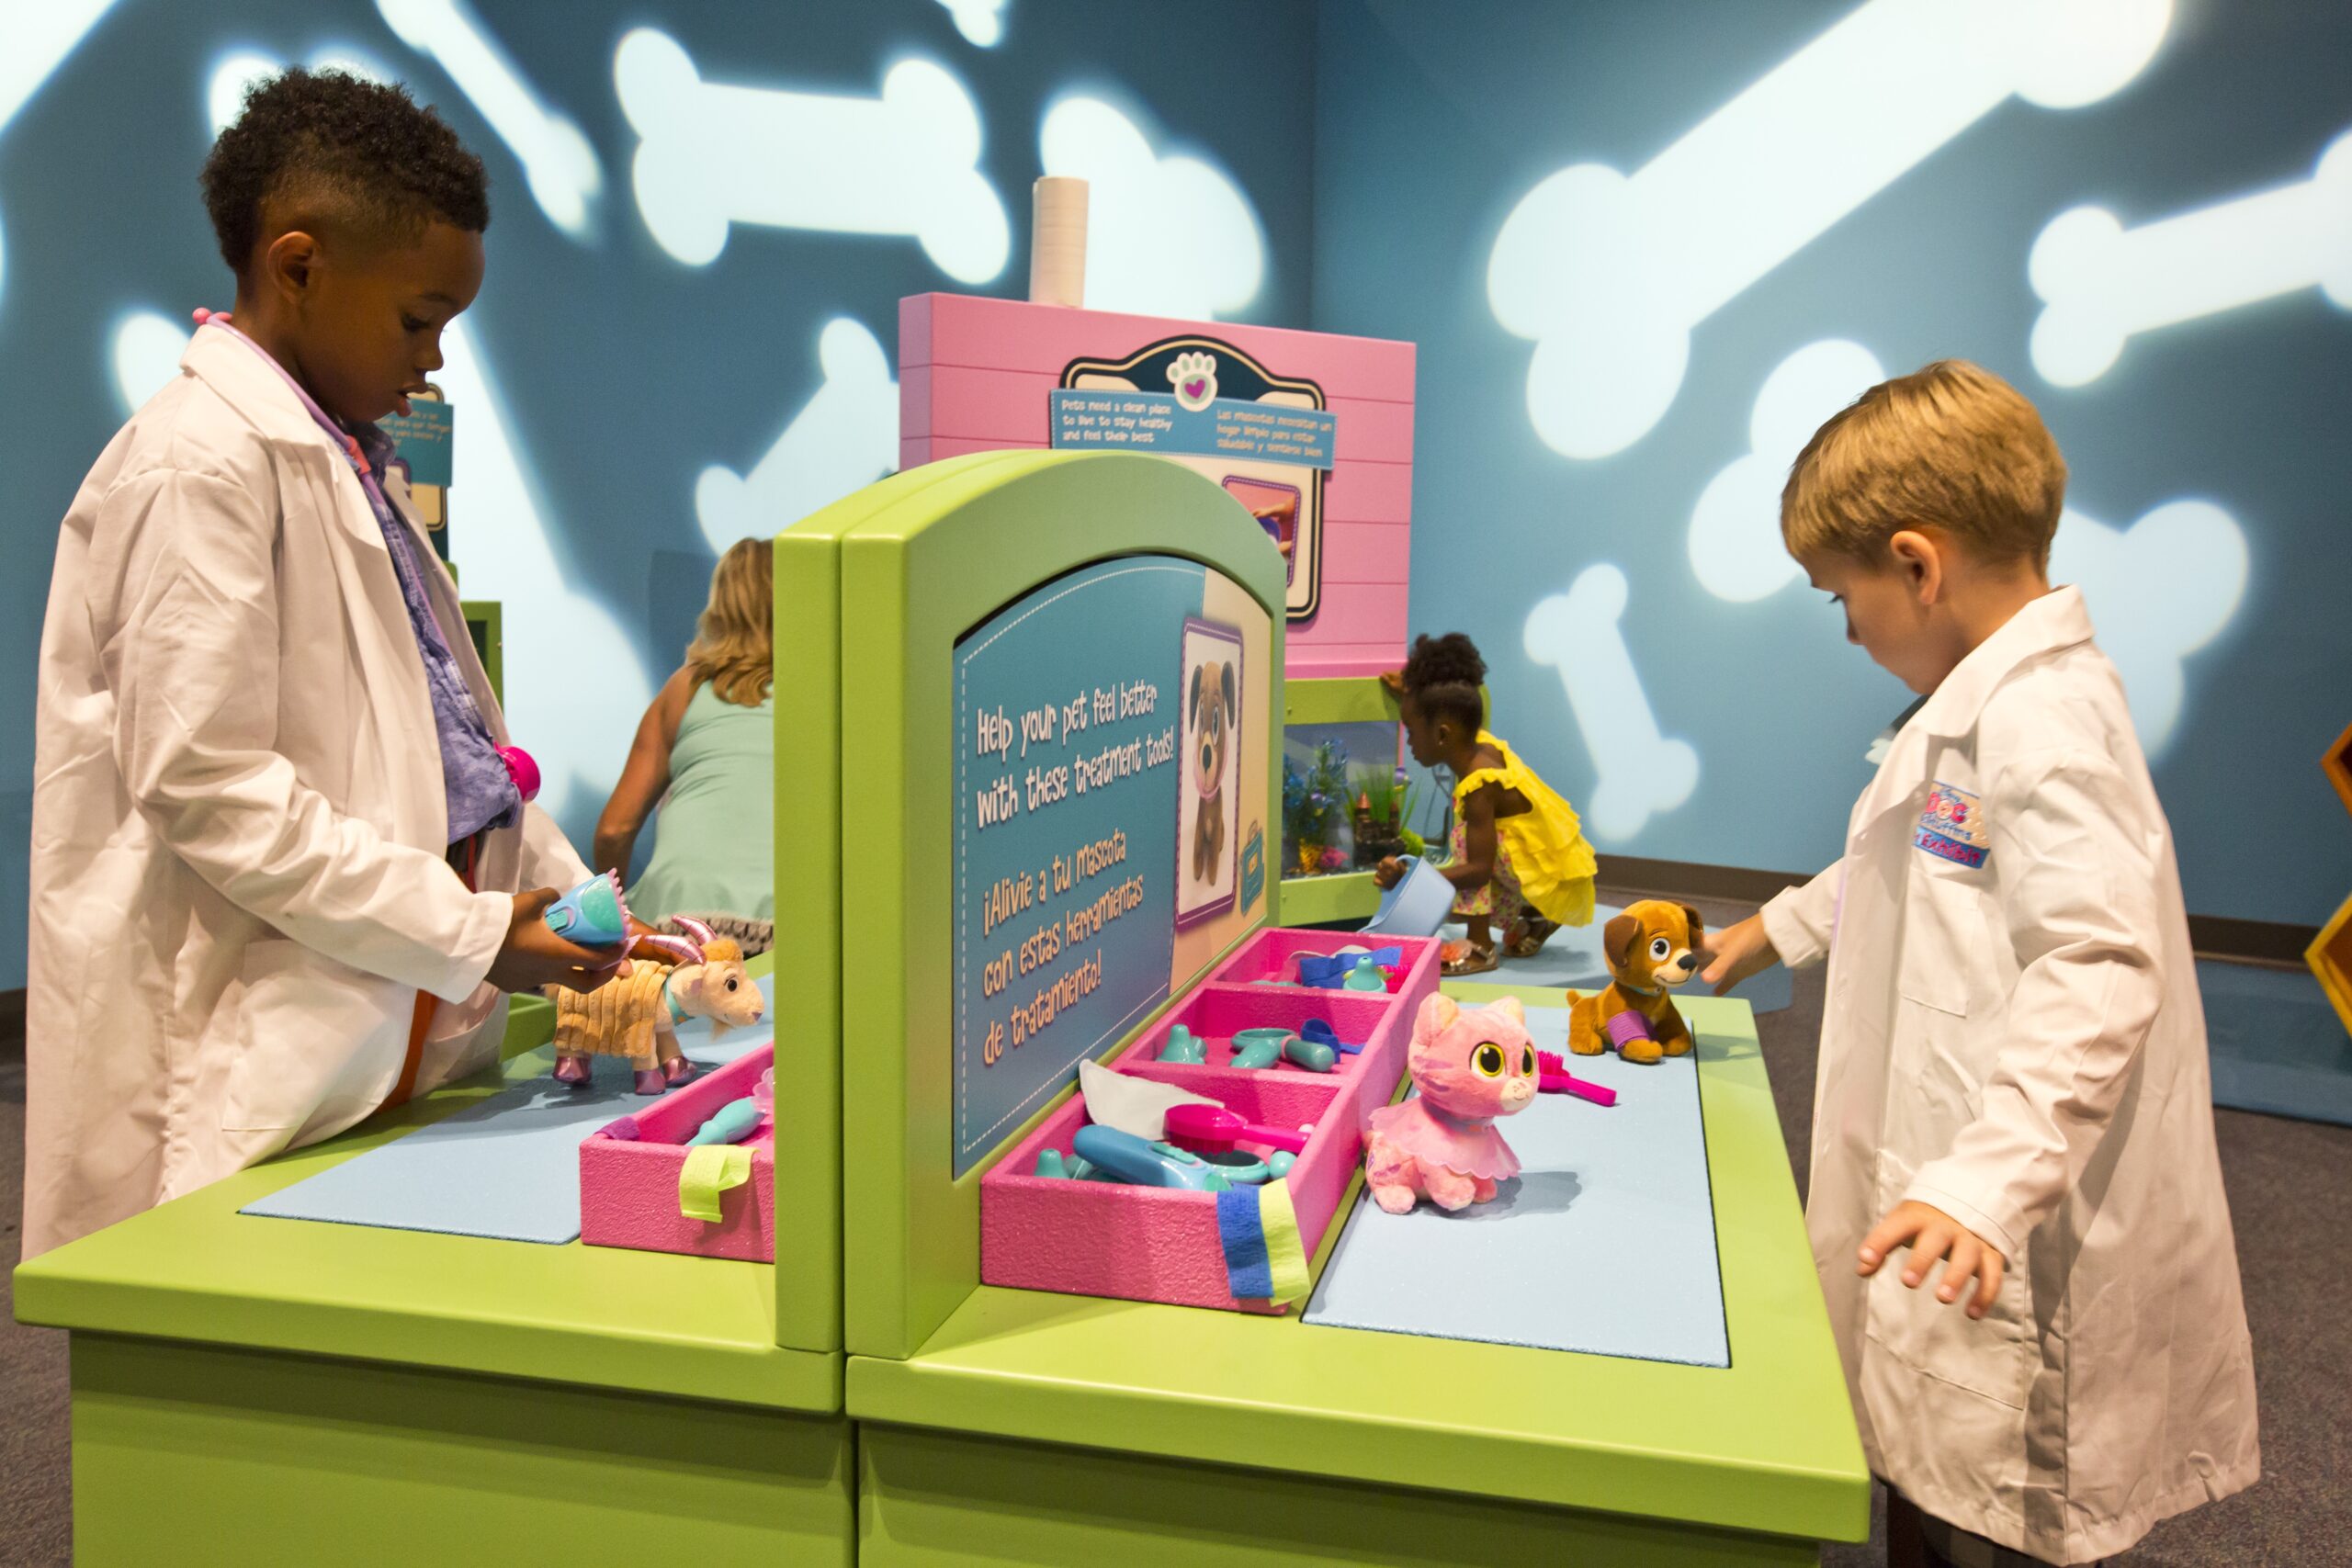 “Doc McStuffins: The Exhibit” is coming to COSI in October